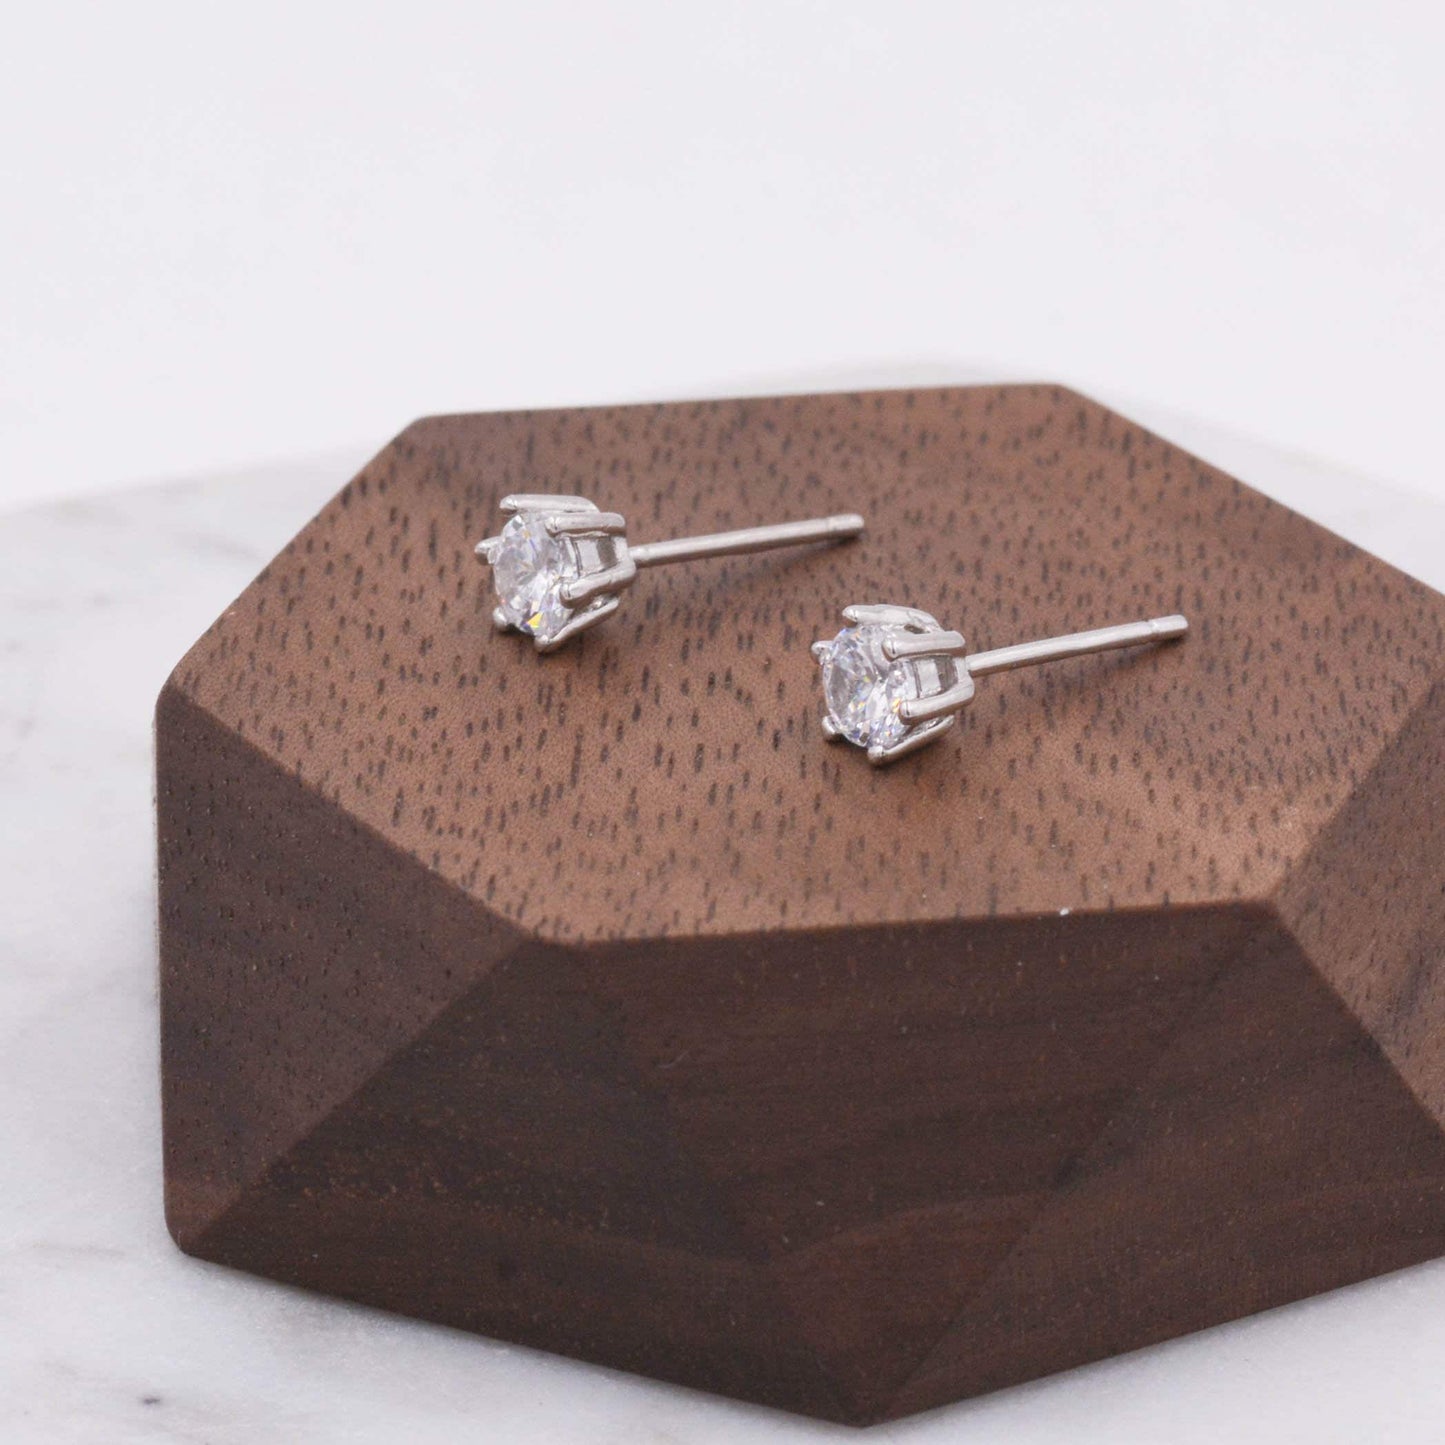 Sterling Silver Minimalist Solitaire CZ Crystal Dot Stud Earrings - Simulated Diamond -  3mm 4mm 5mm 6mm Six Prong Earrings